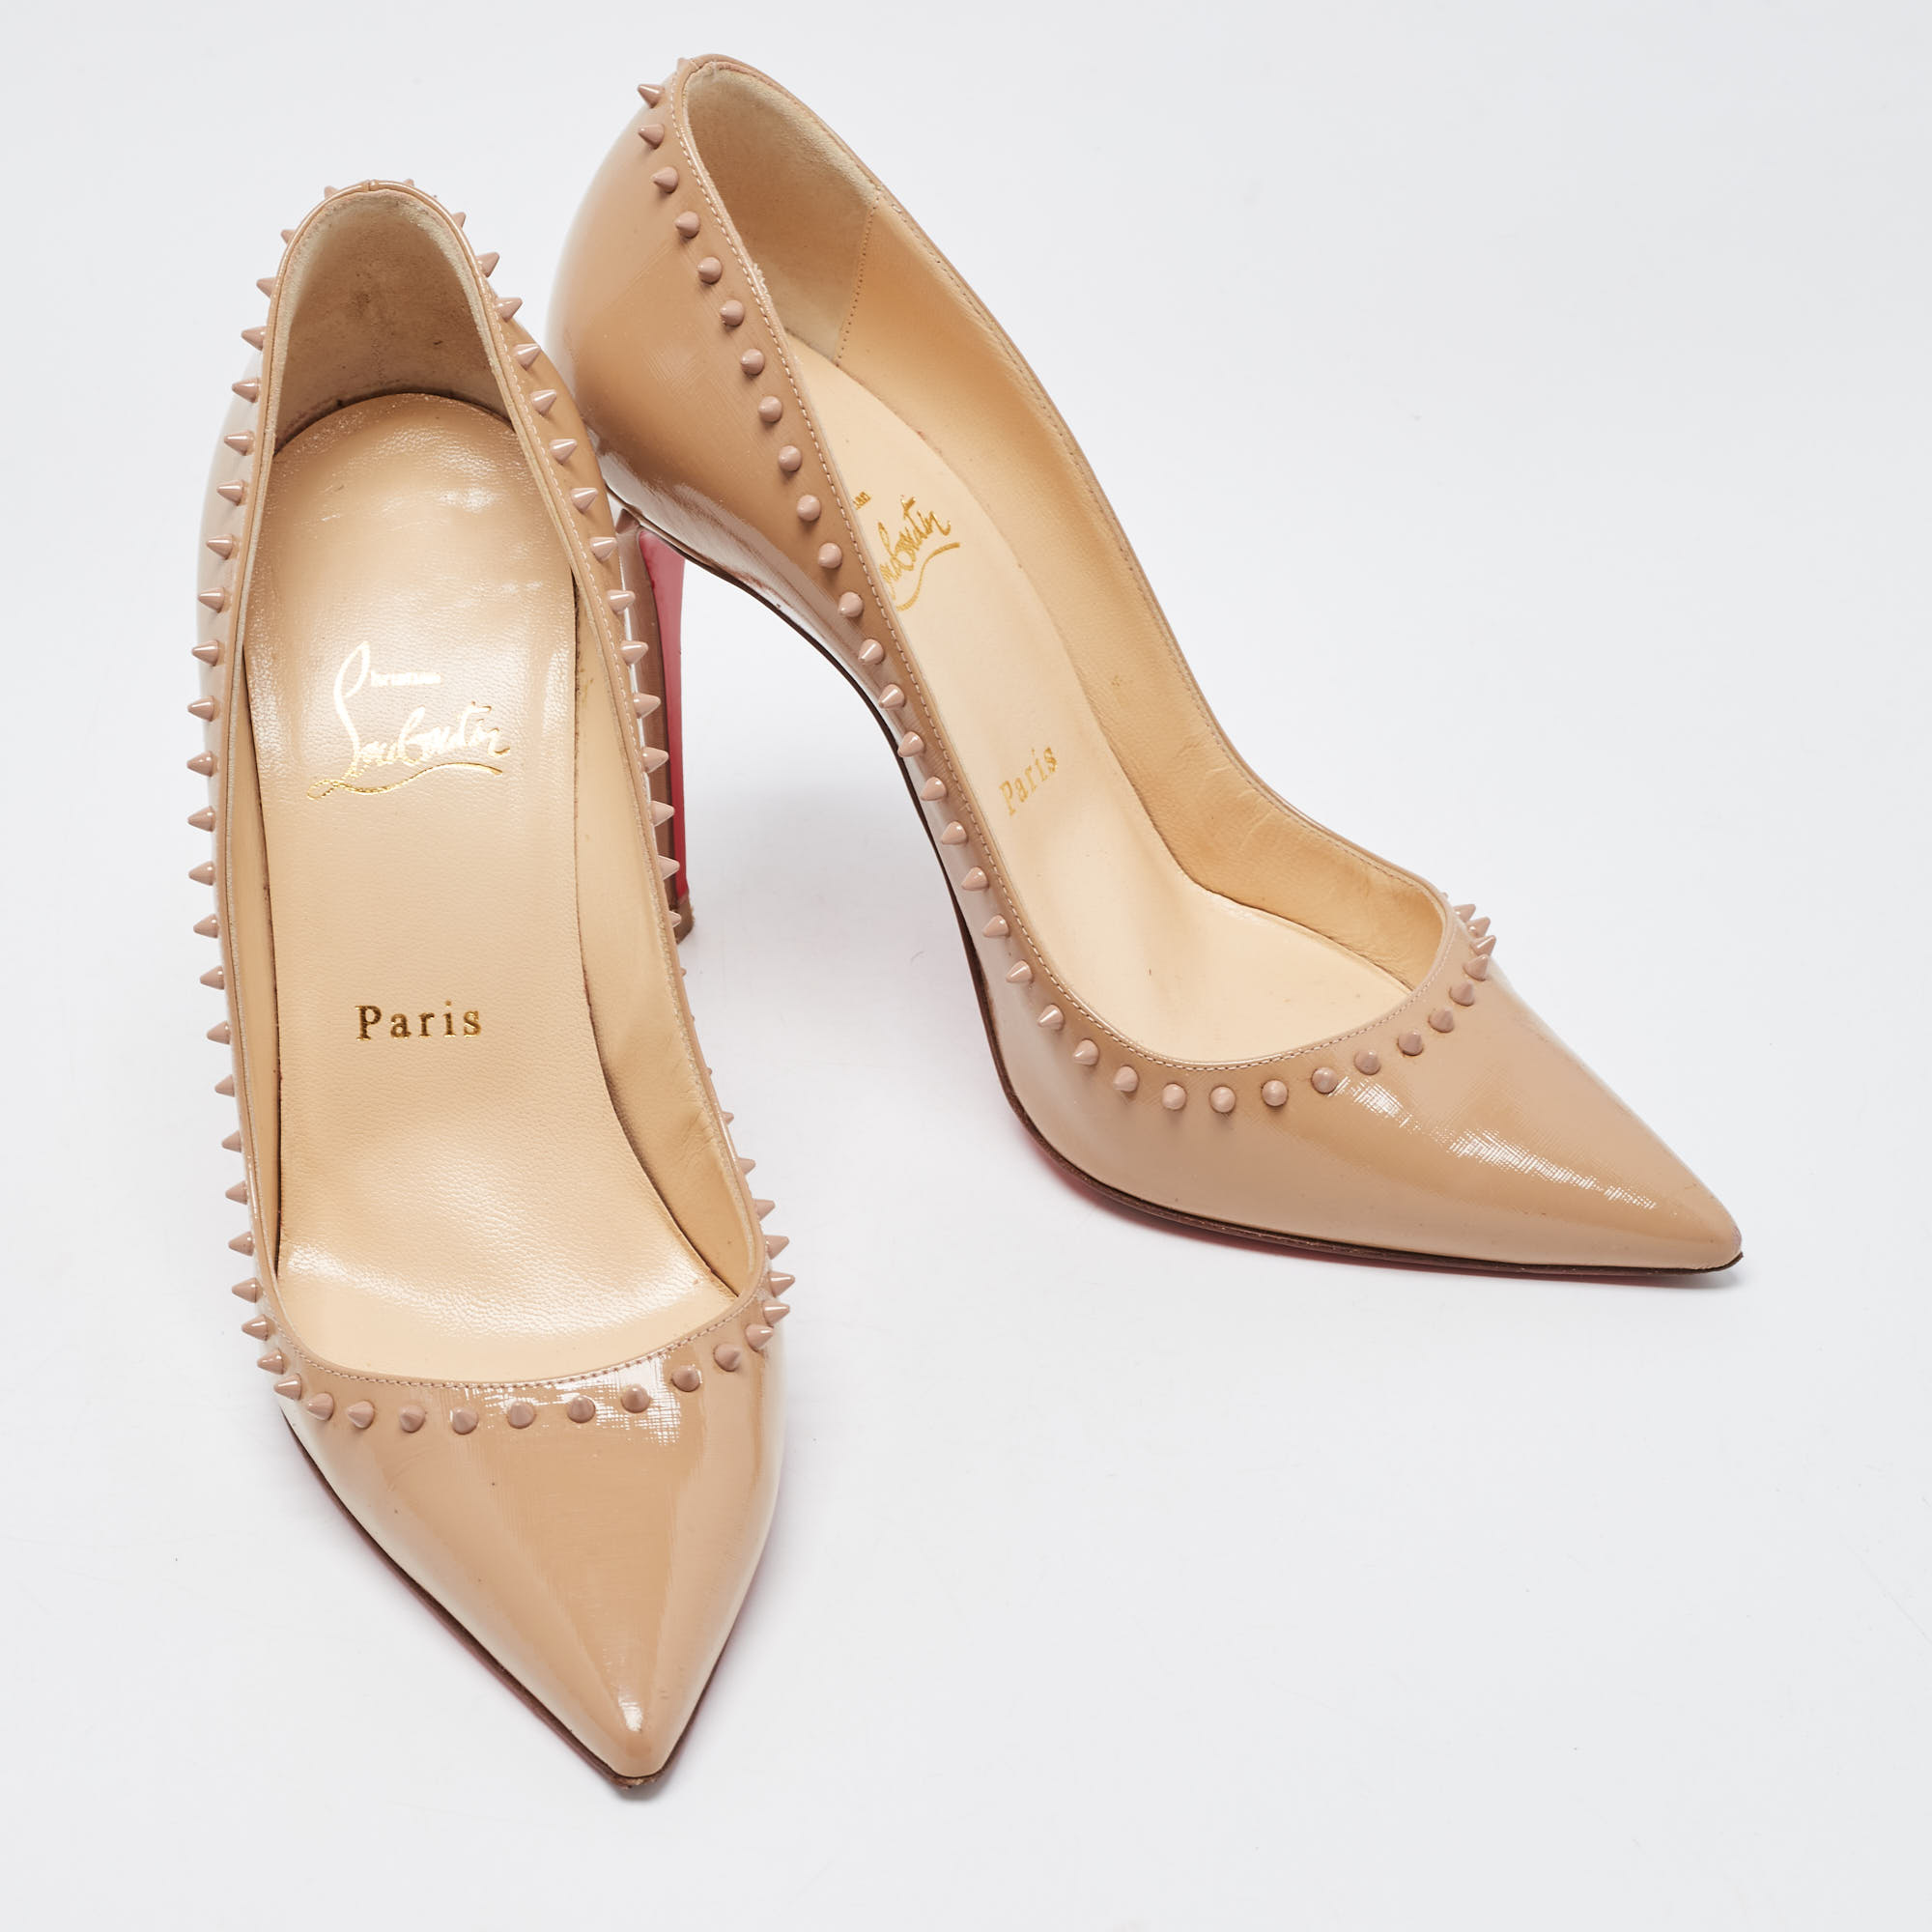 Christian Louboutin Beige Patent Leather Anjalina Spike Pointed Toe Pumps Size 38